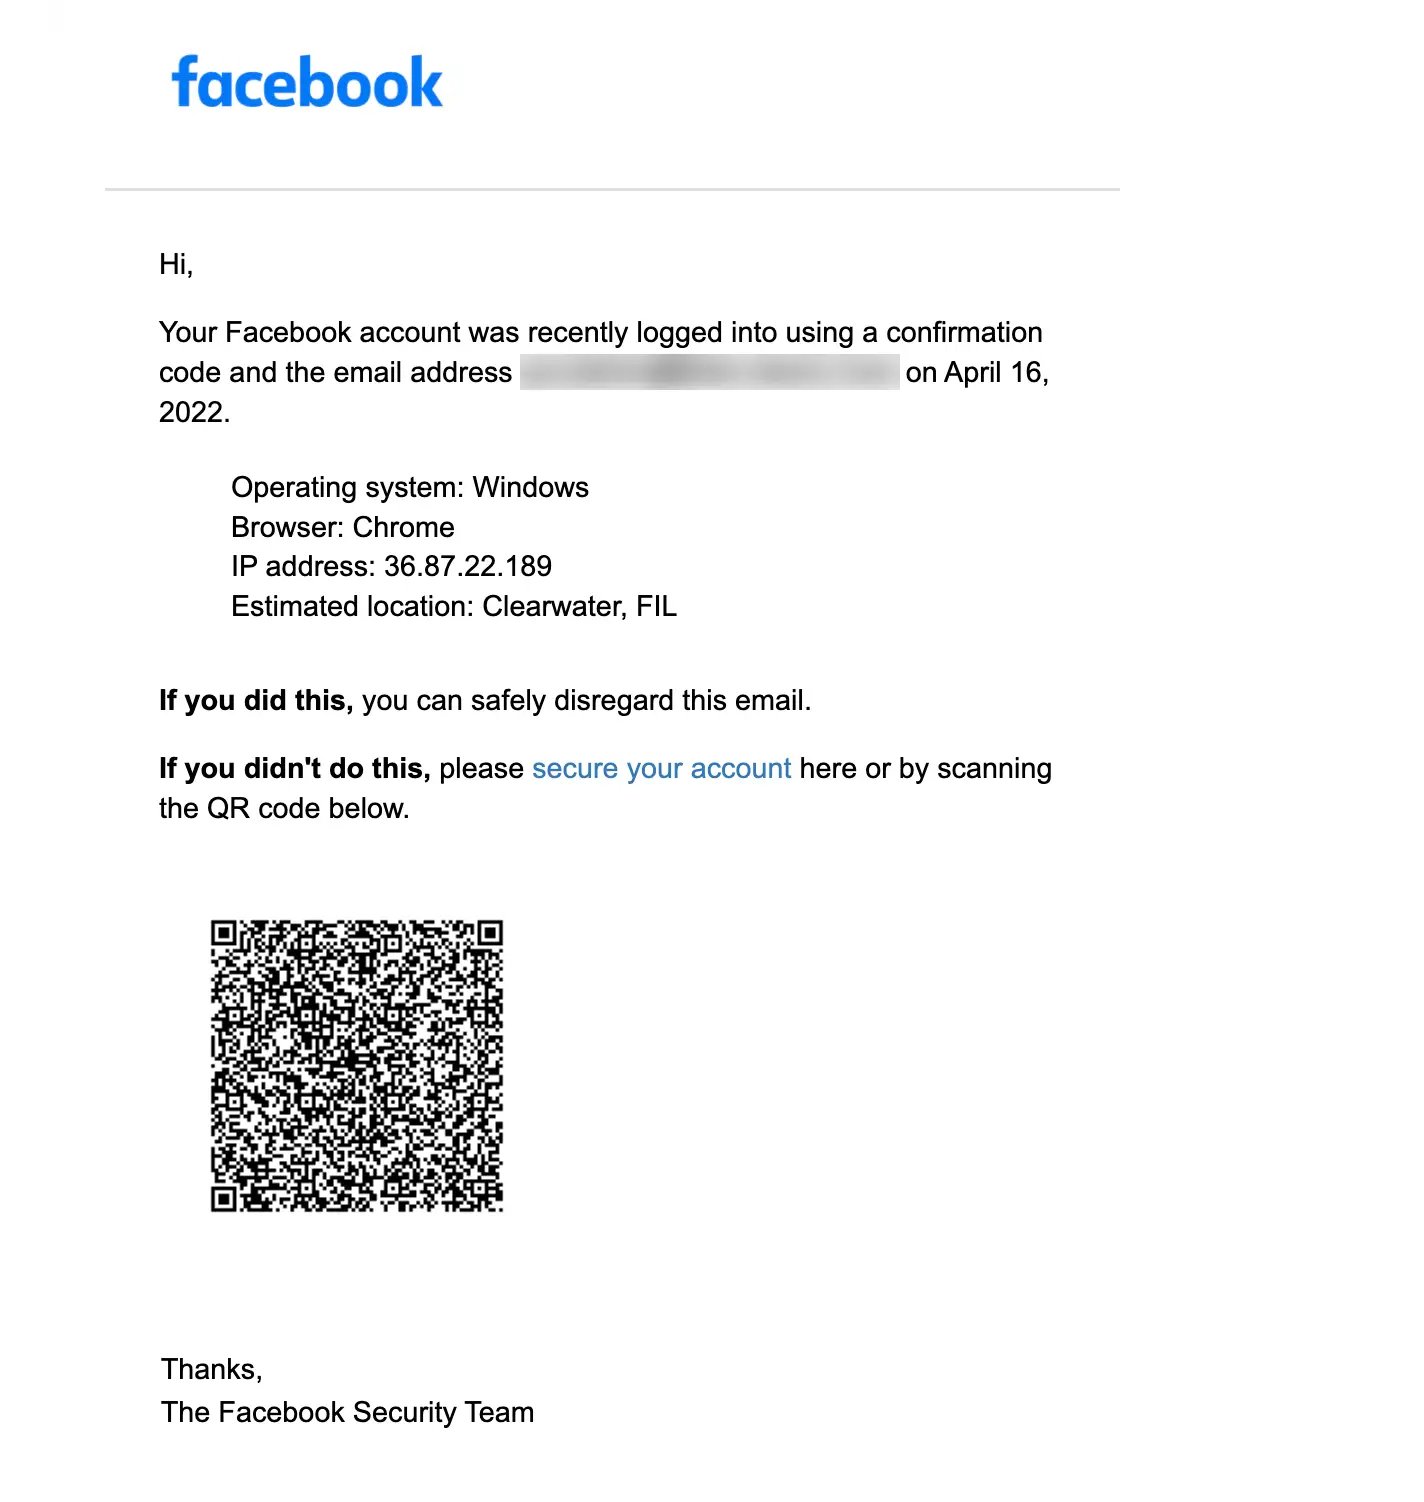 QRCode Phishing Email sent - Facebook email as an example